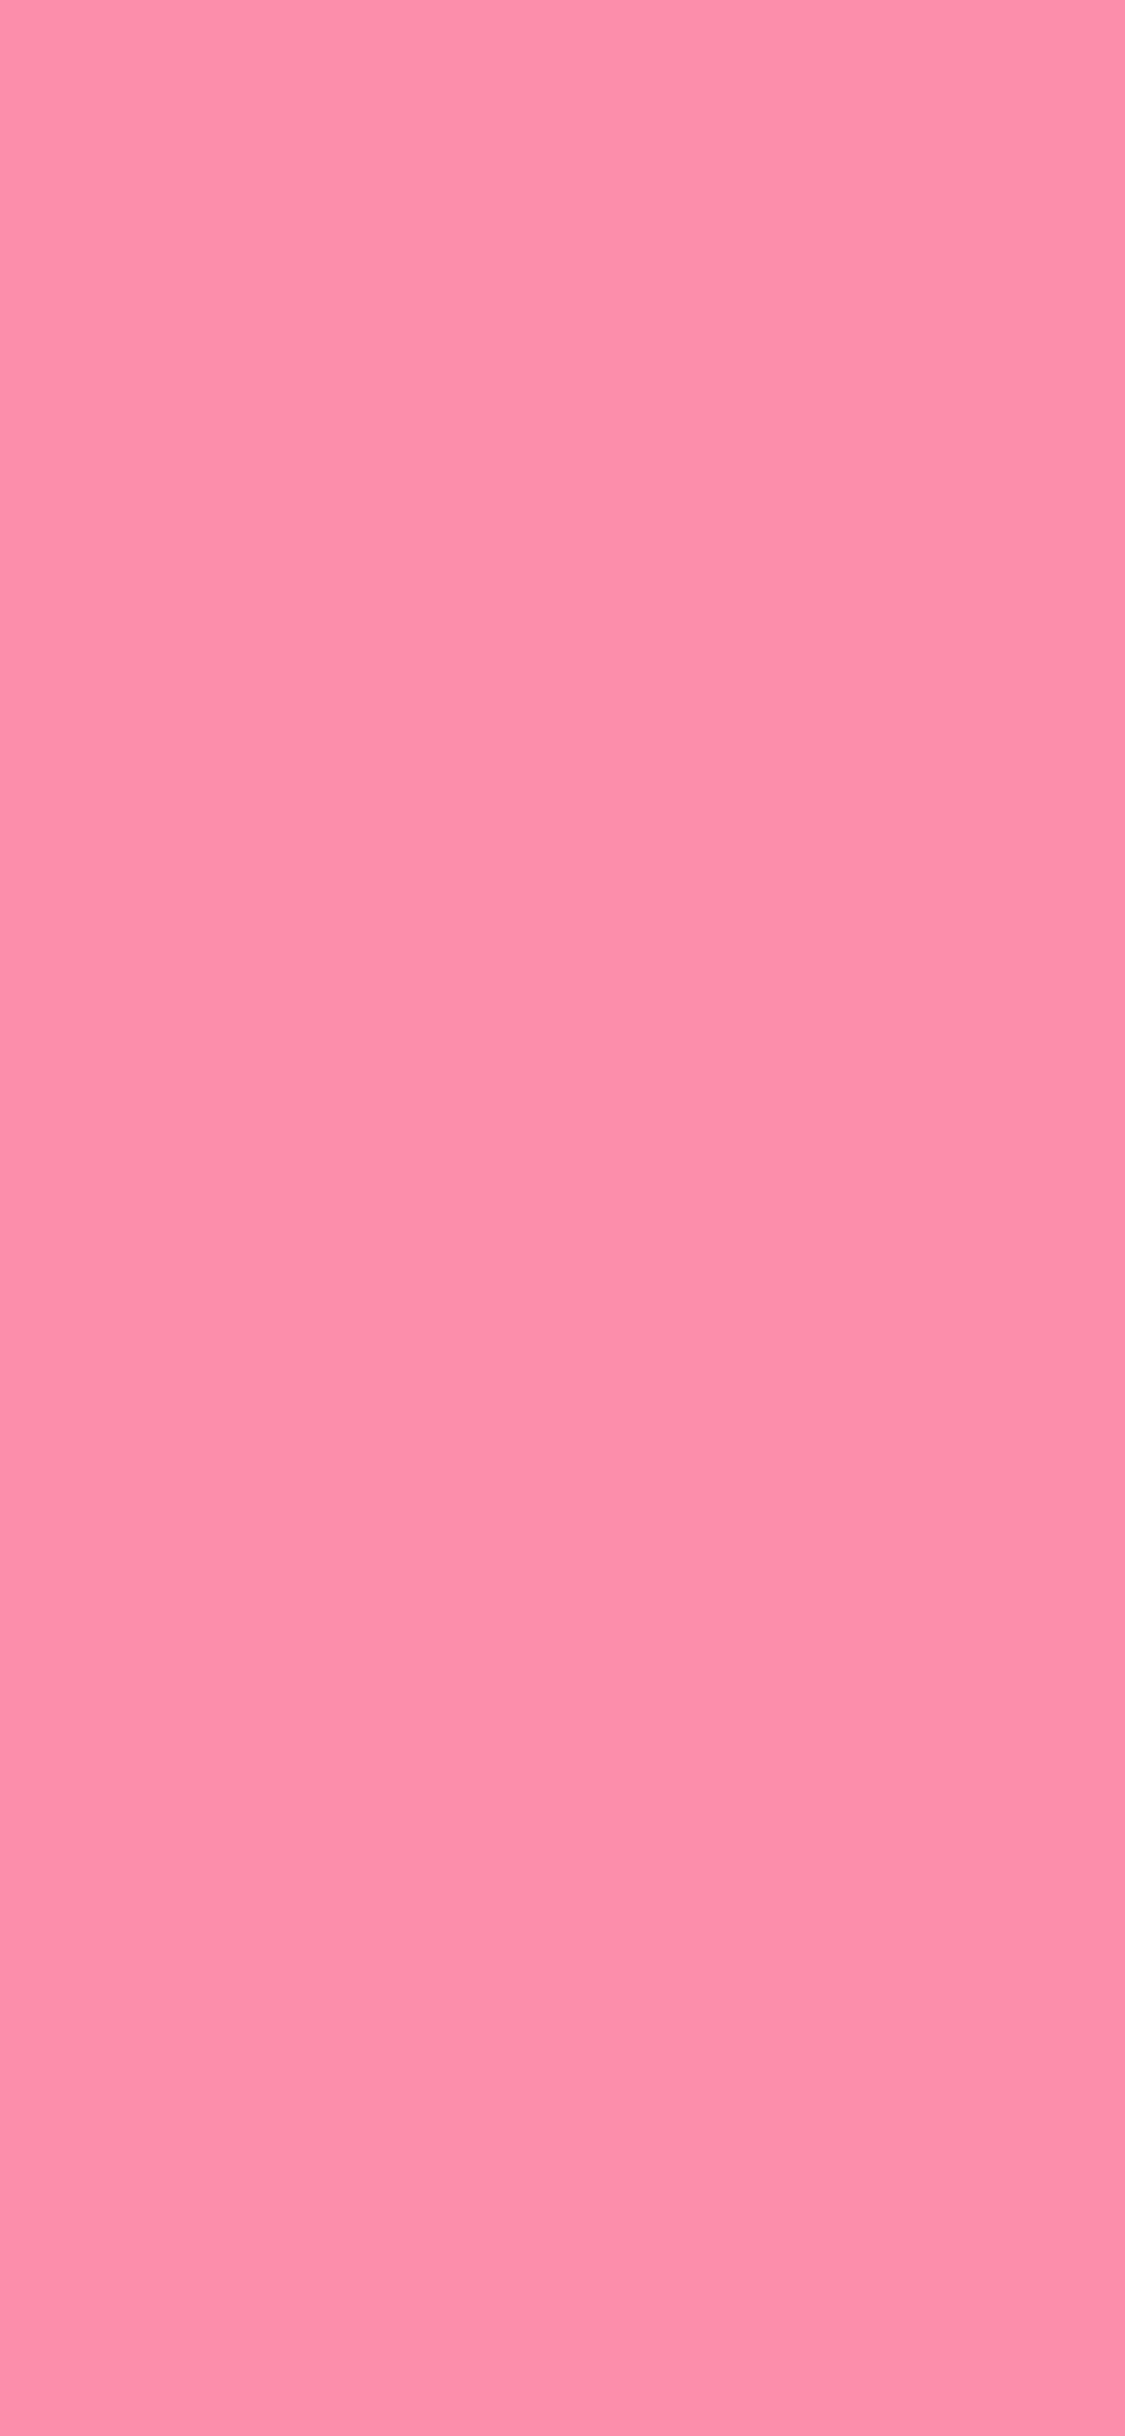 1125x2436 Flamingo Pink Solid Color Background